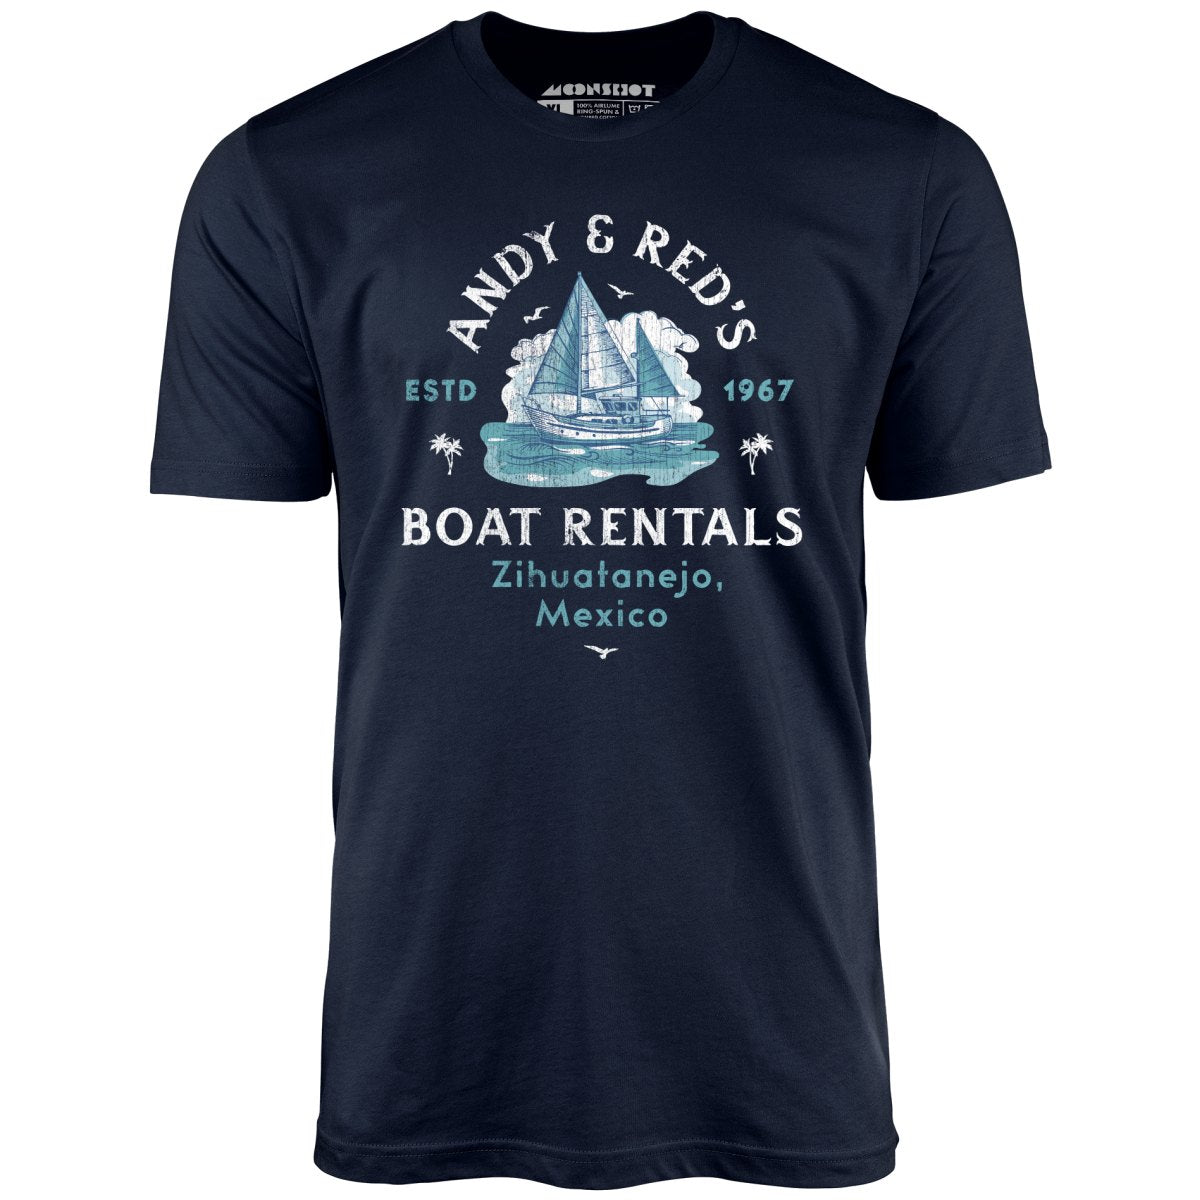 Andy & Red's Boat Rentals - Unisex T-Shirt